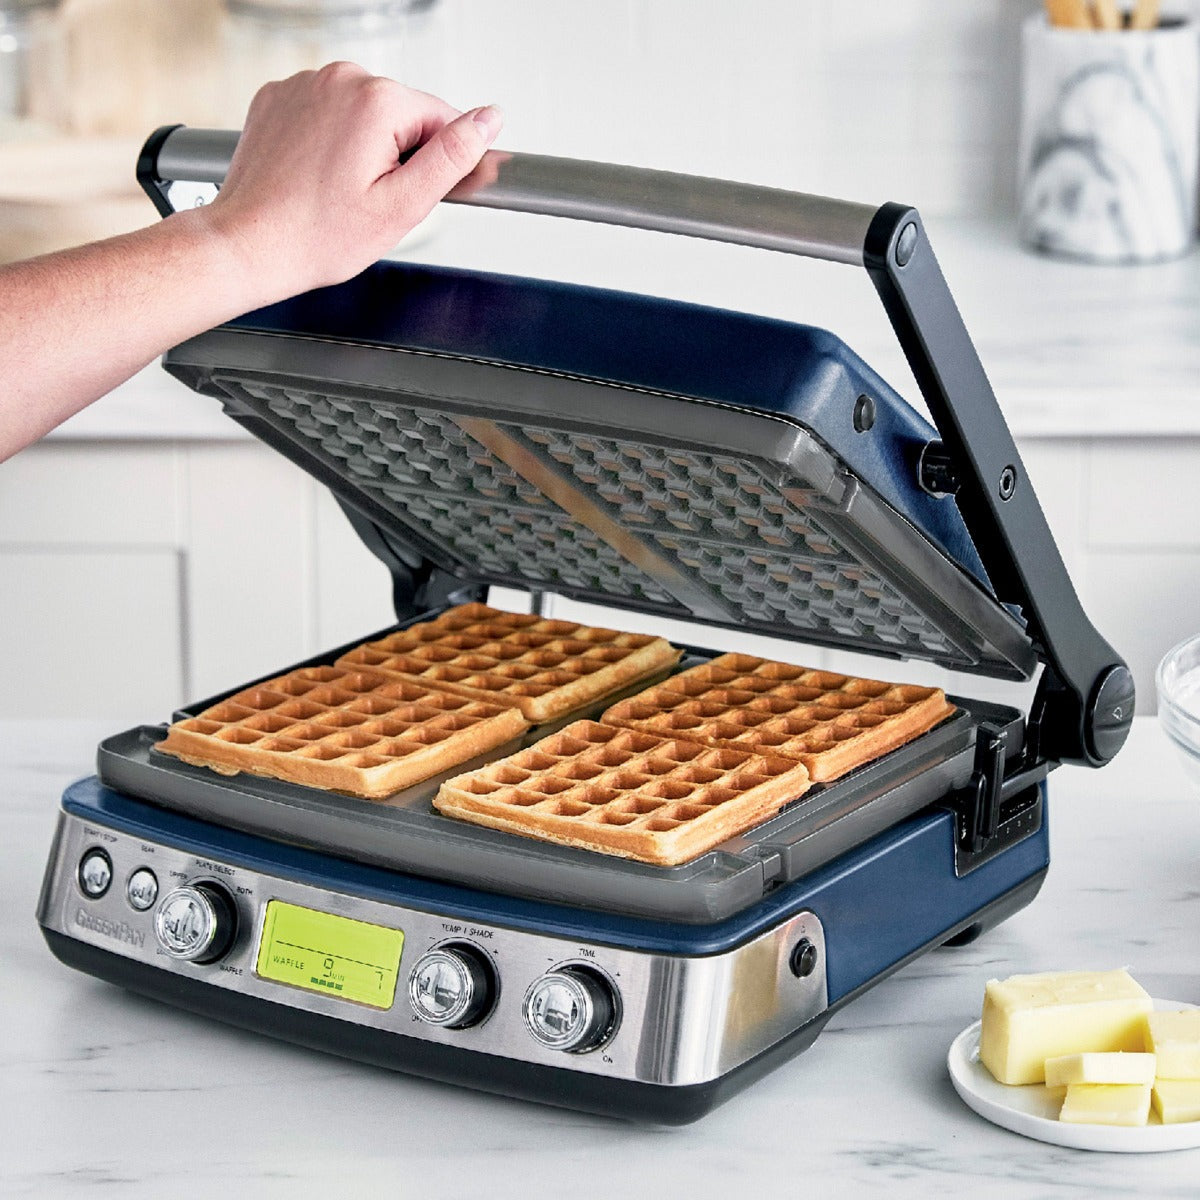 Breville Smart Panini Grill & Griddle